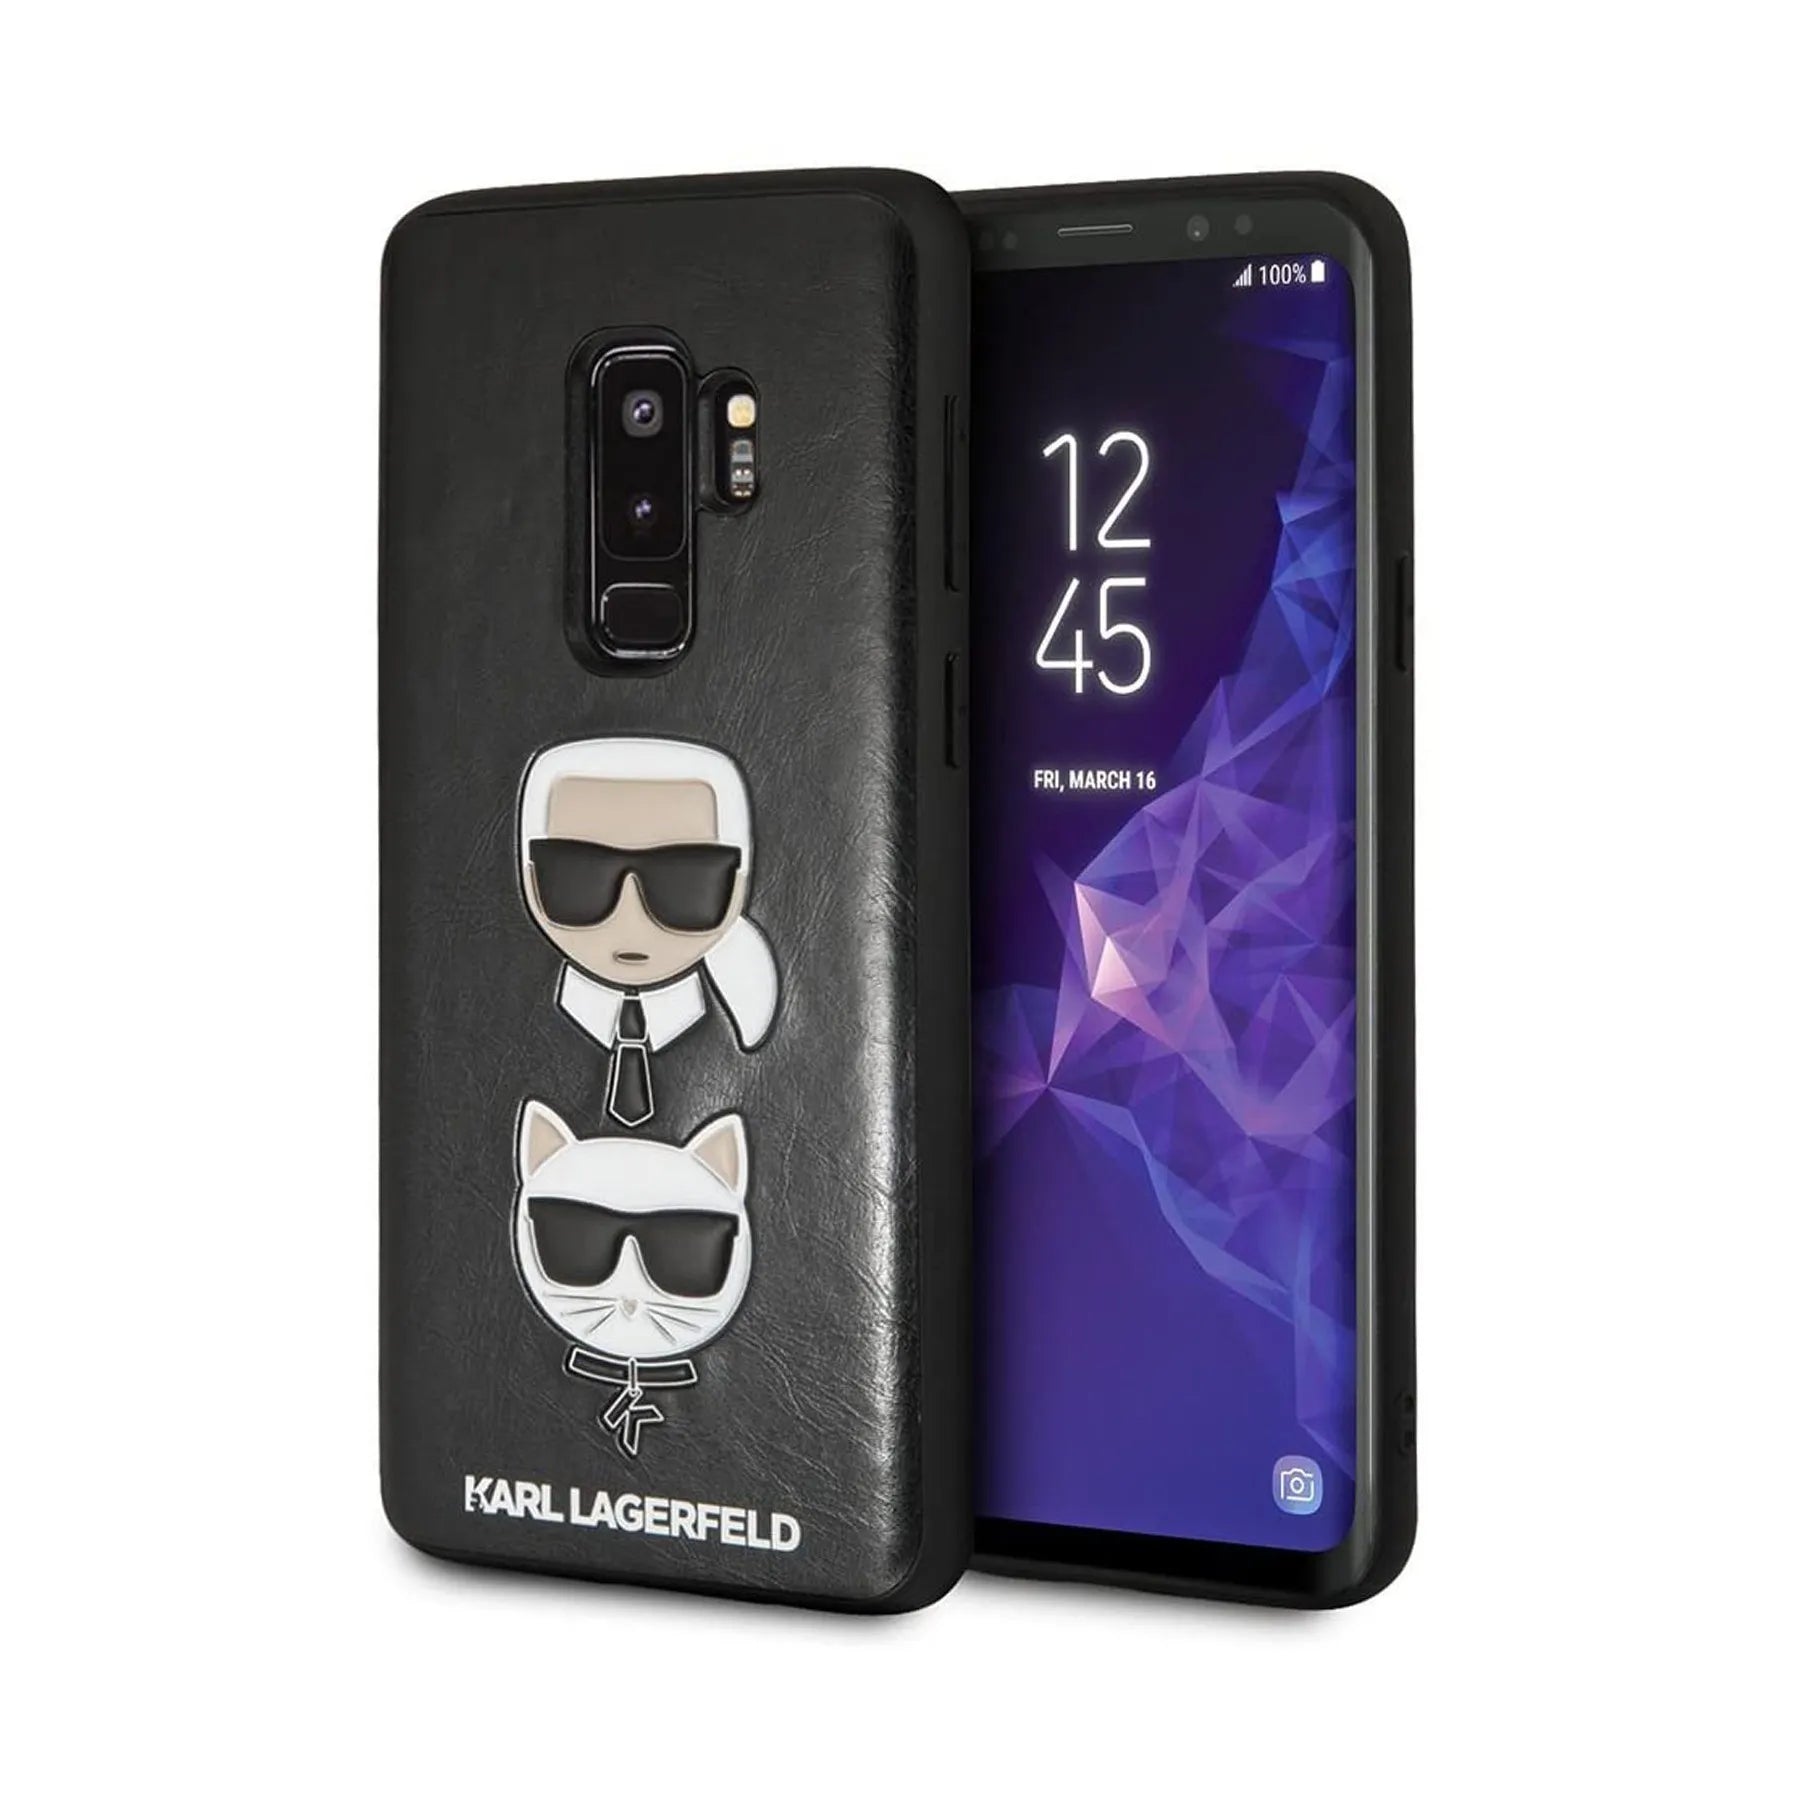 Coque Karl Lagerfeld pour Samsung S9 Plus - My Store